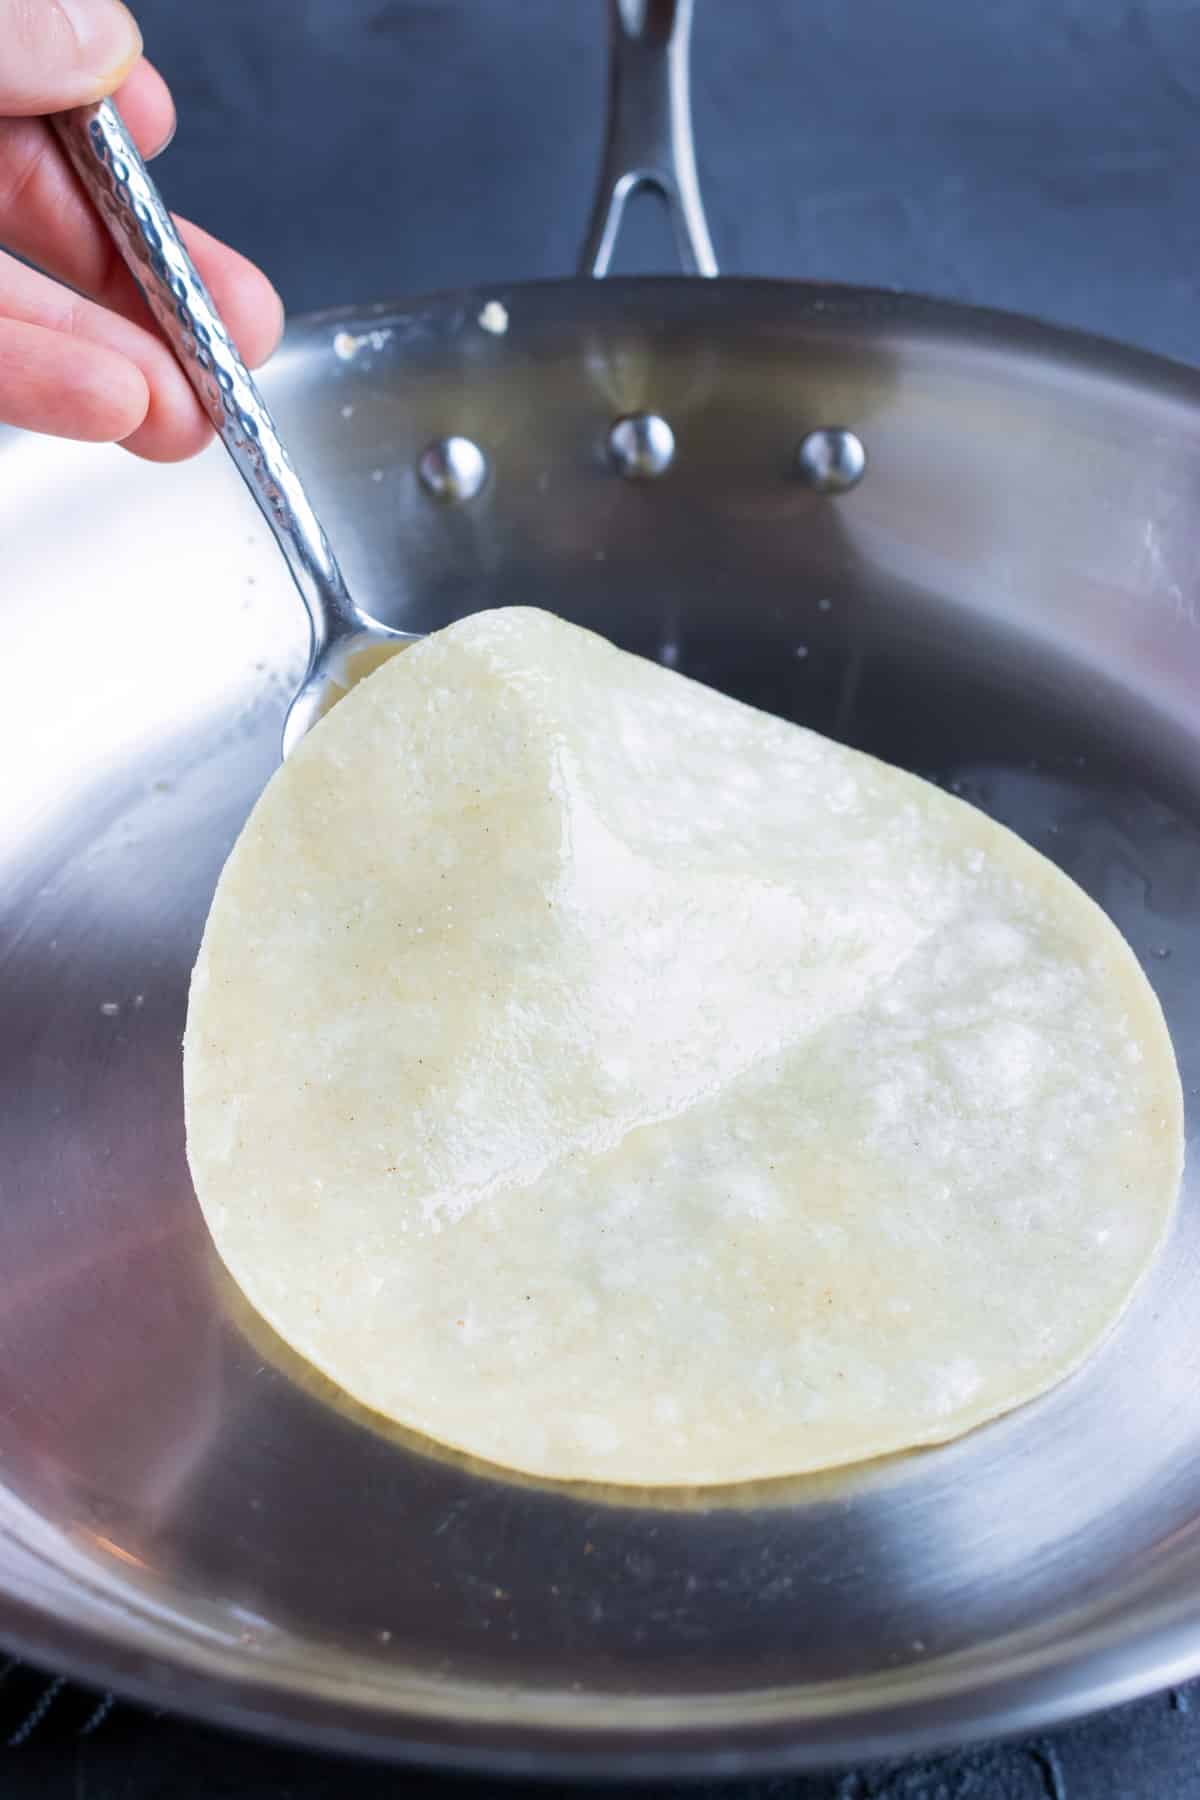 A corn tortilla being lightly toasted in coconut oil in a skillet for a taco.